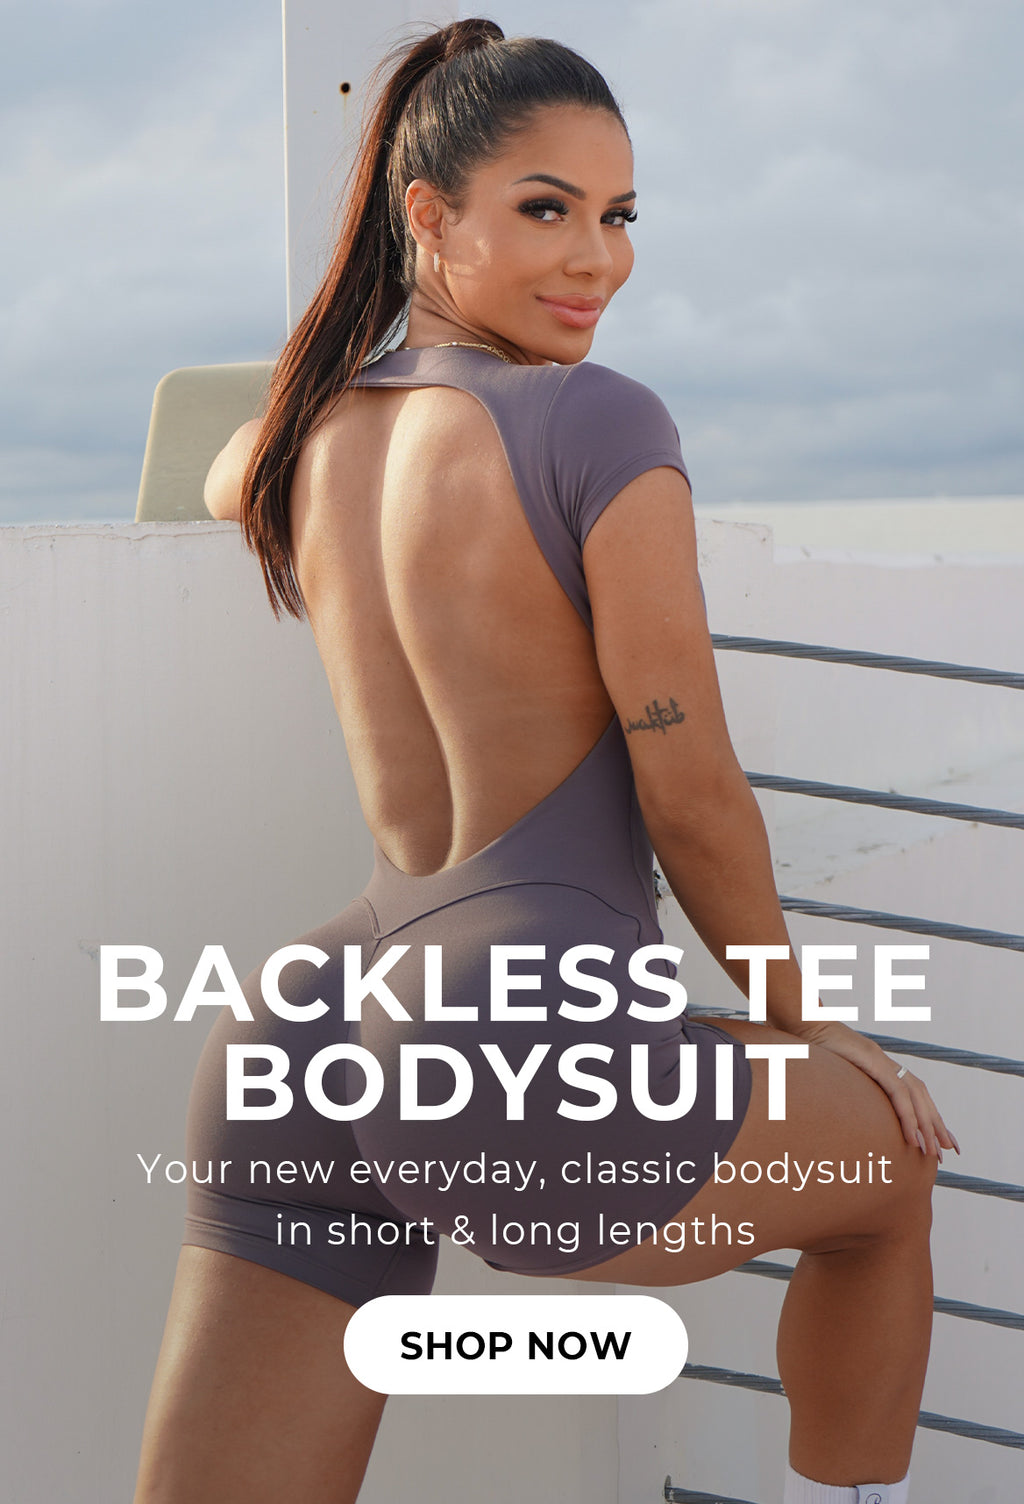 Image is a back profile image of model stretching in the gray smoke open back bodysuit shorts with text overlay that reads "BACKLESS TEE BODYSUIT Your new everyday, classic bodysuit in short and long lengths" call to action button says SHOP NOW